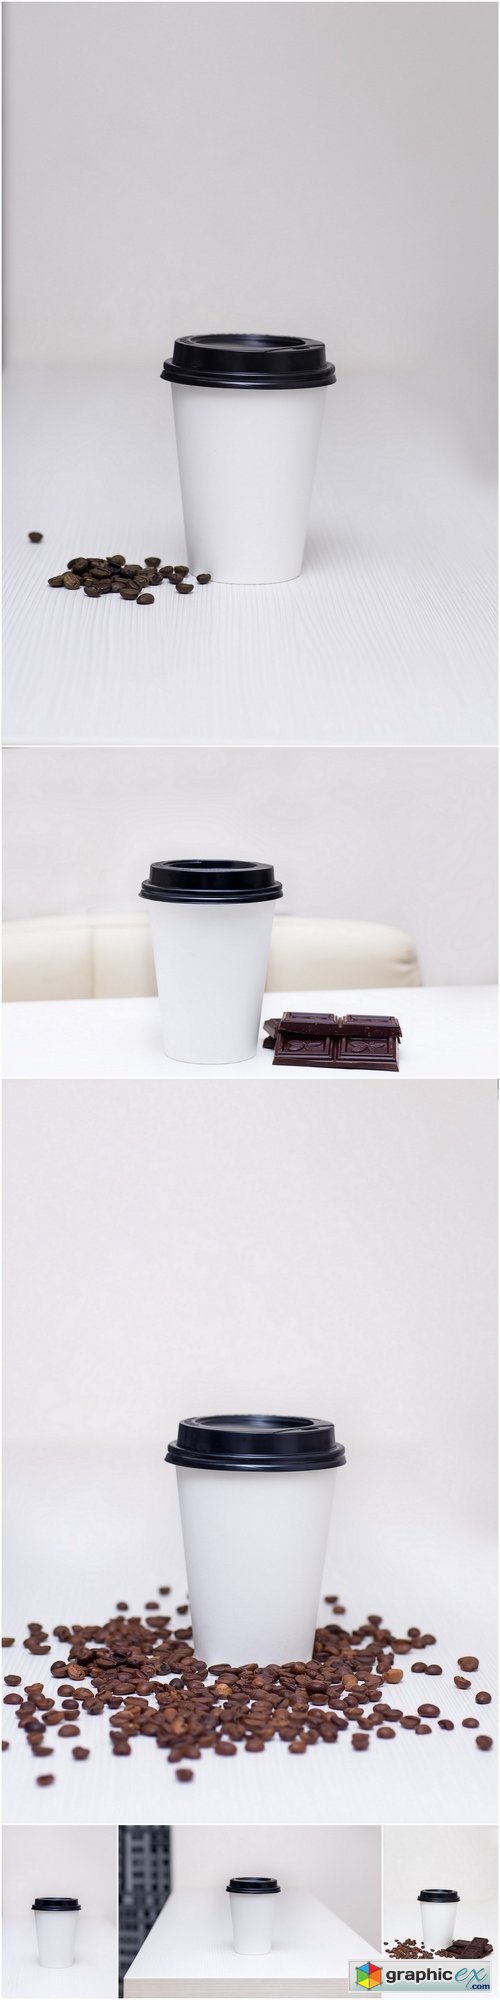 Paper cup with coffee and chocolate